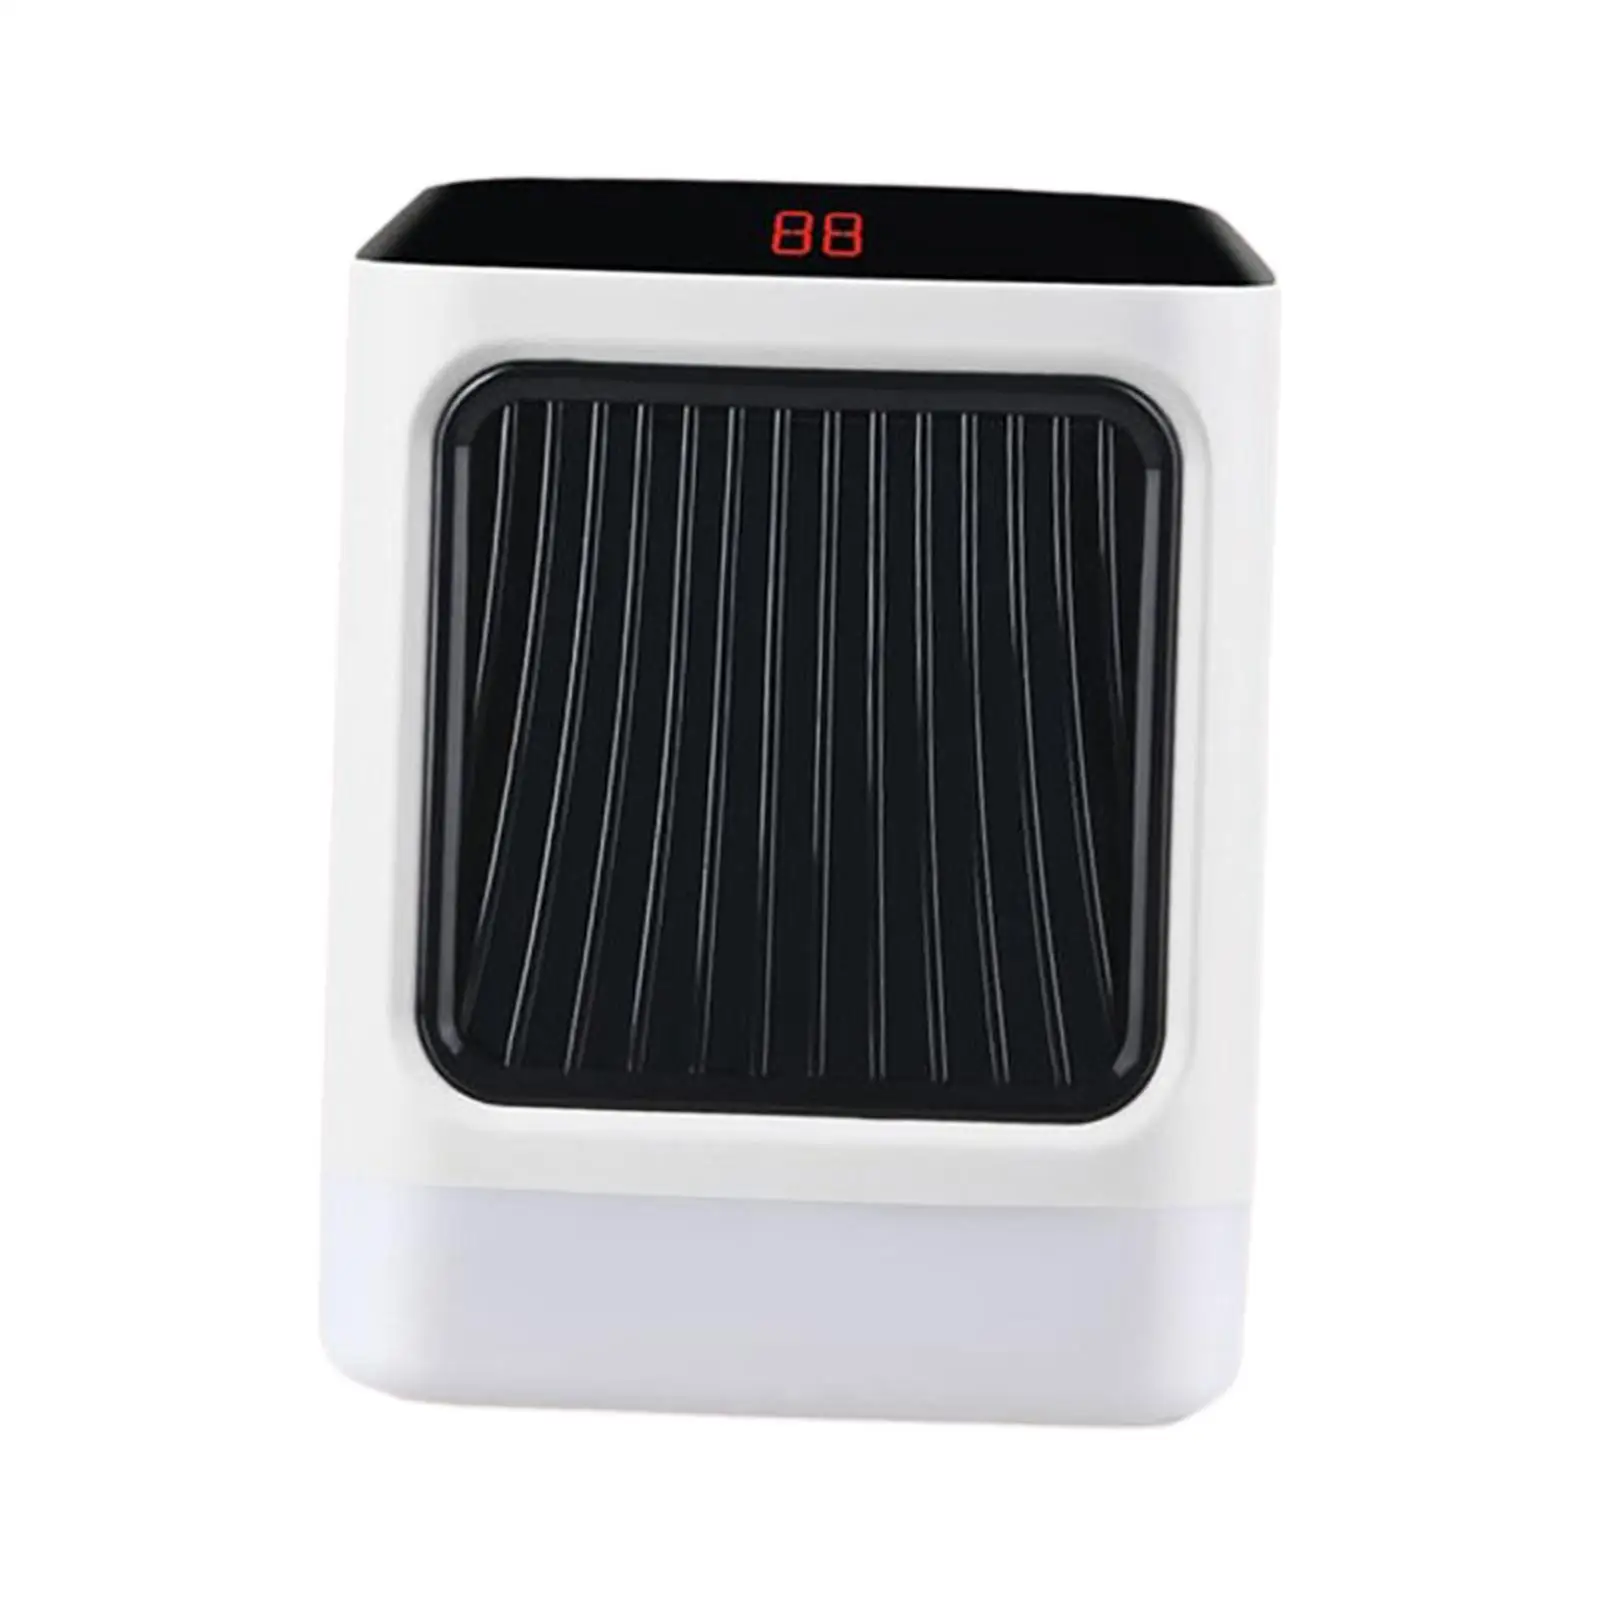 Portable Electric Heater Thermostat Night Light Timer Fast Heating 800W Fan Heater for Desk Indoor Use Office Bedroom Home